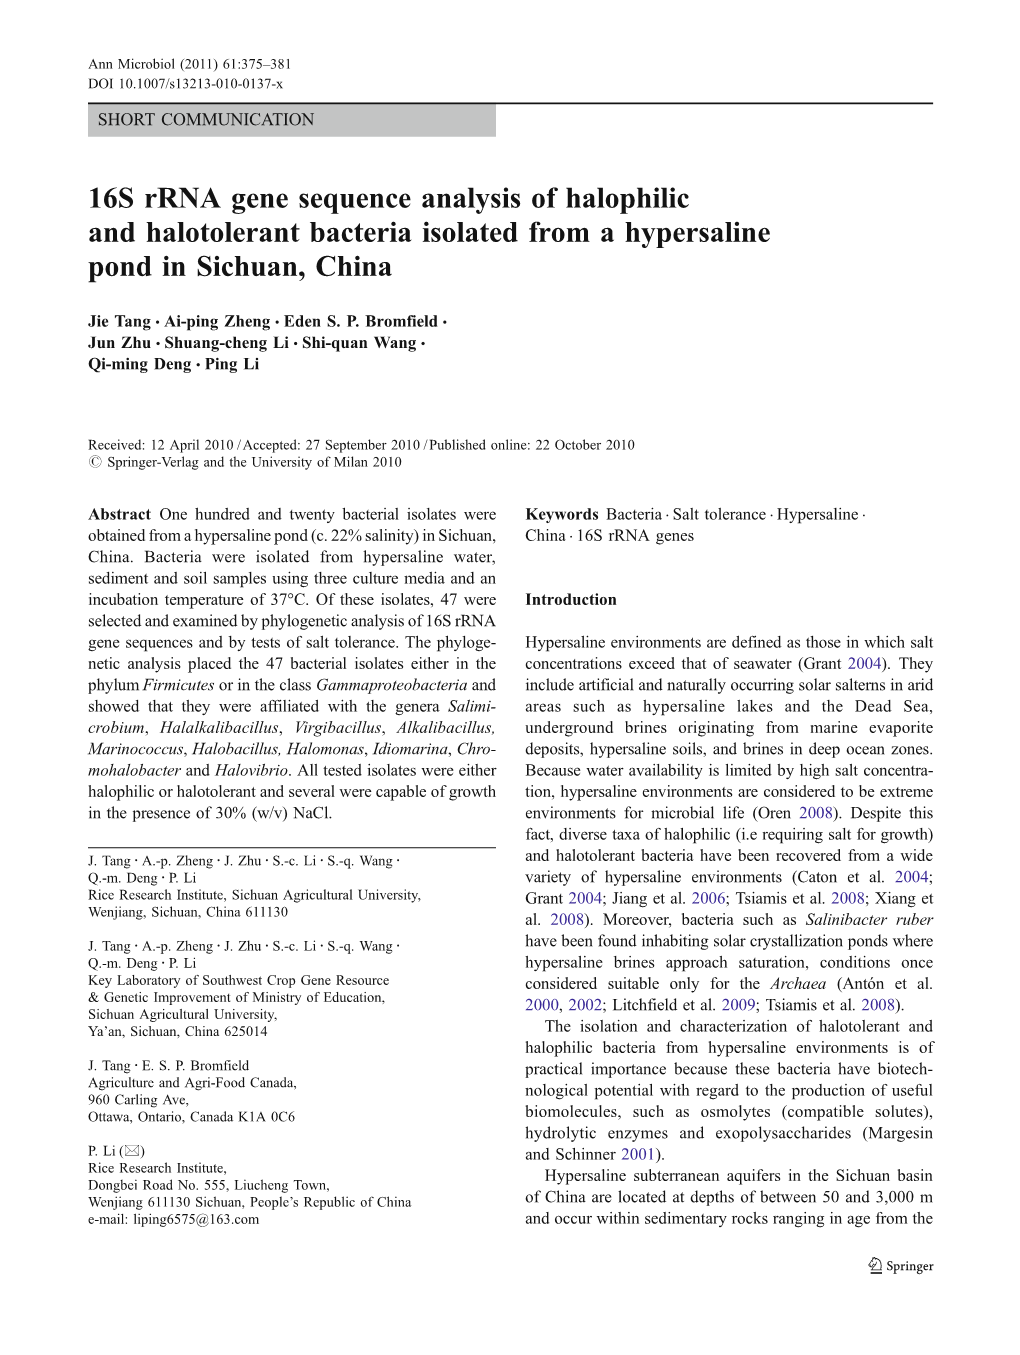 16S Rrna Gene Sequence Analysis of Halophilic and Halotolerant Bacteria Isolated from a Hypersaline Pond in Sichuan, China